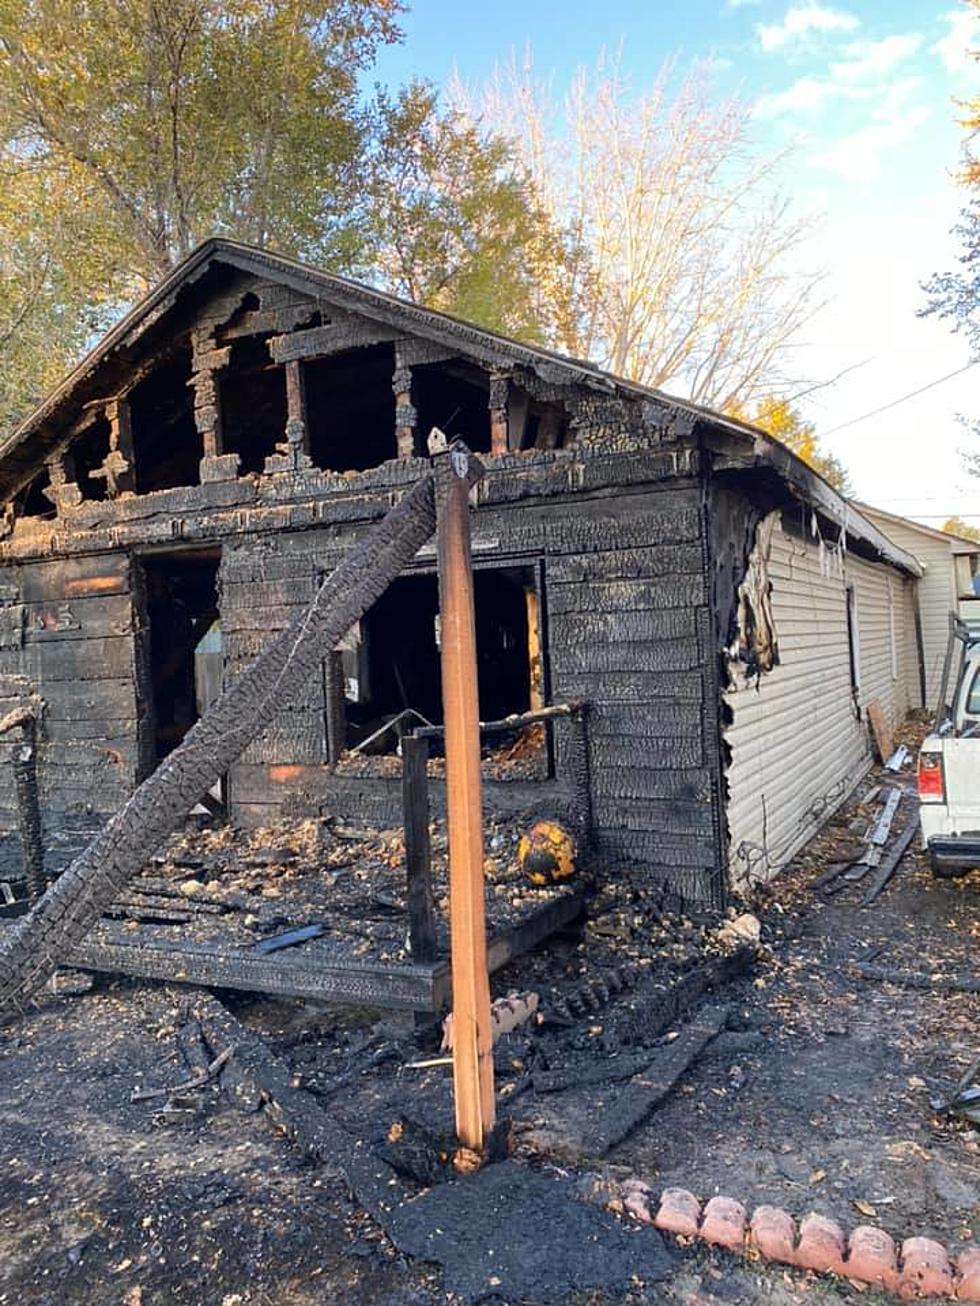 Gooding House Fire Sends One to Hospital, Displaces Family